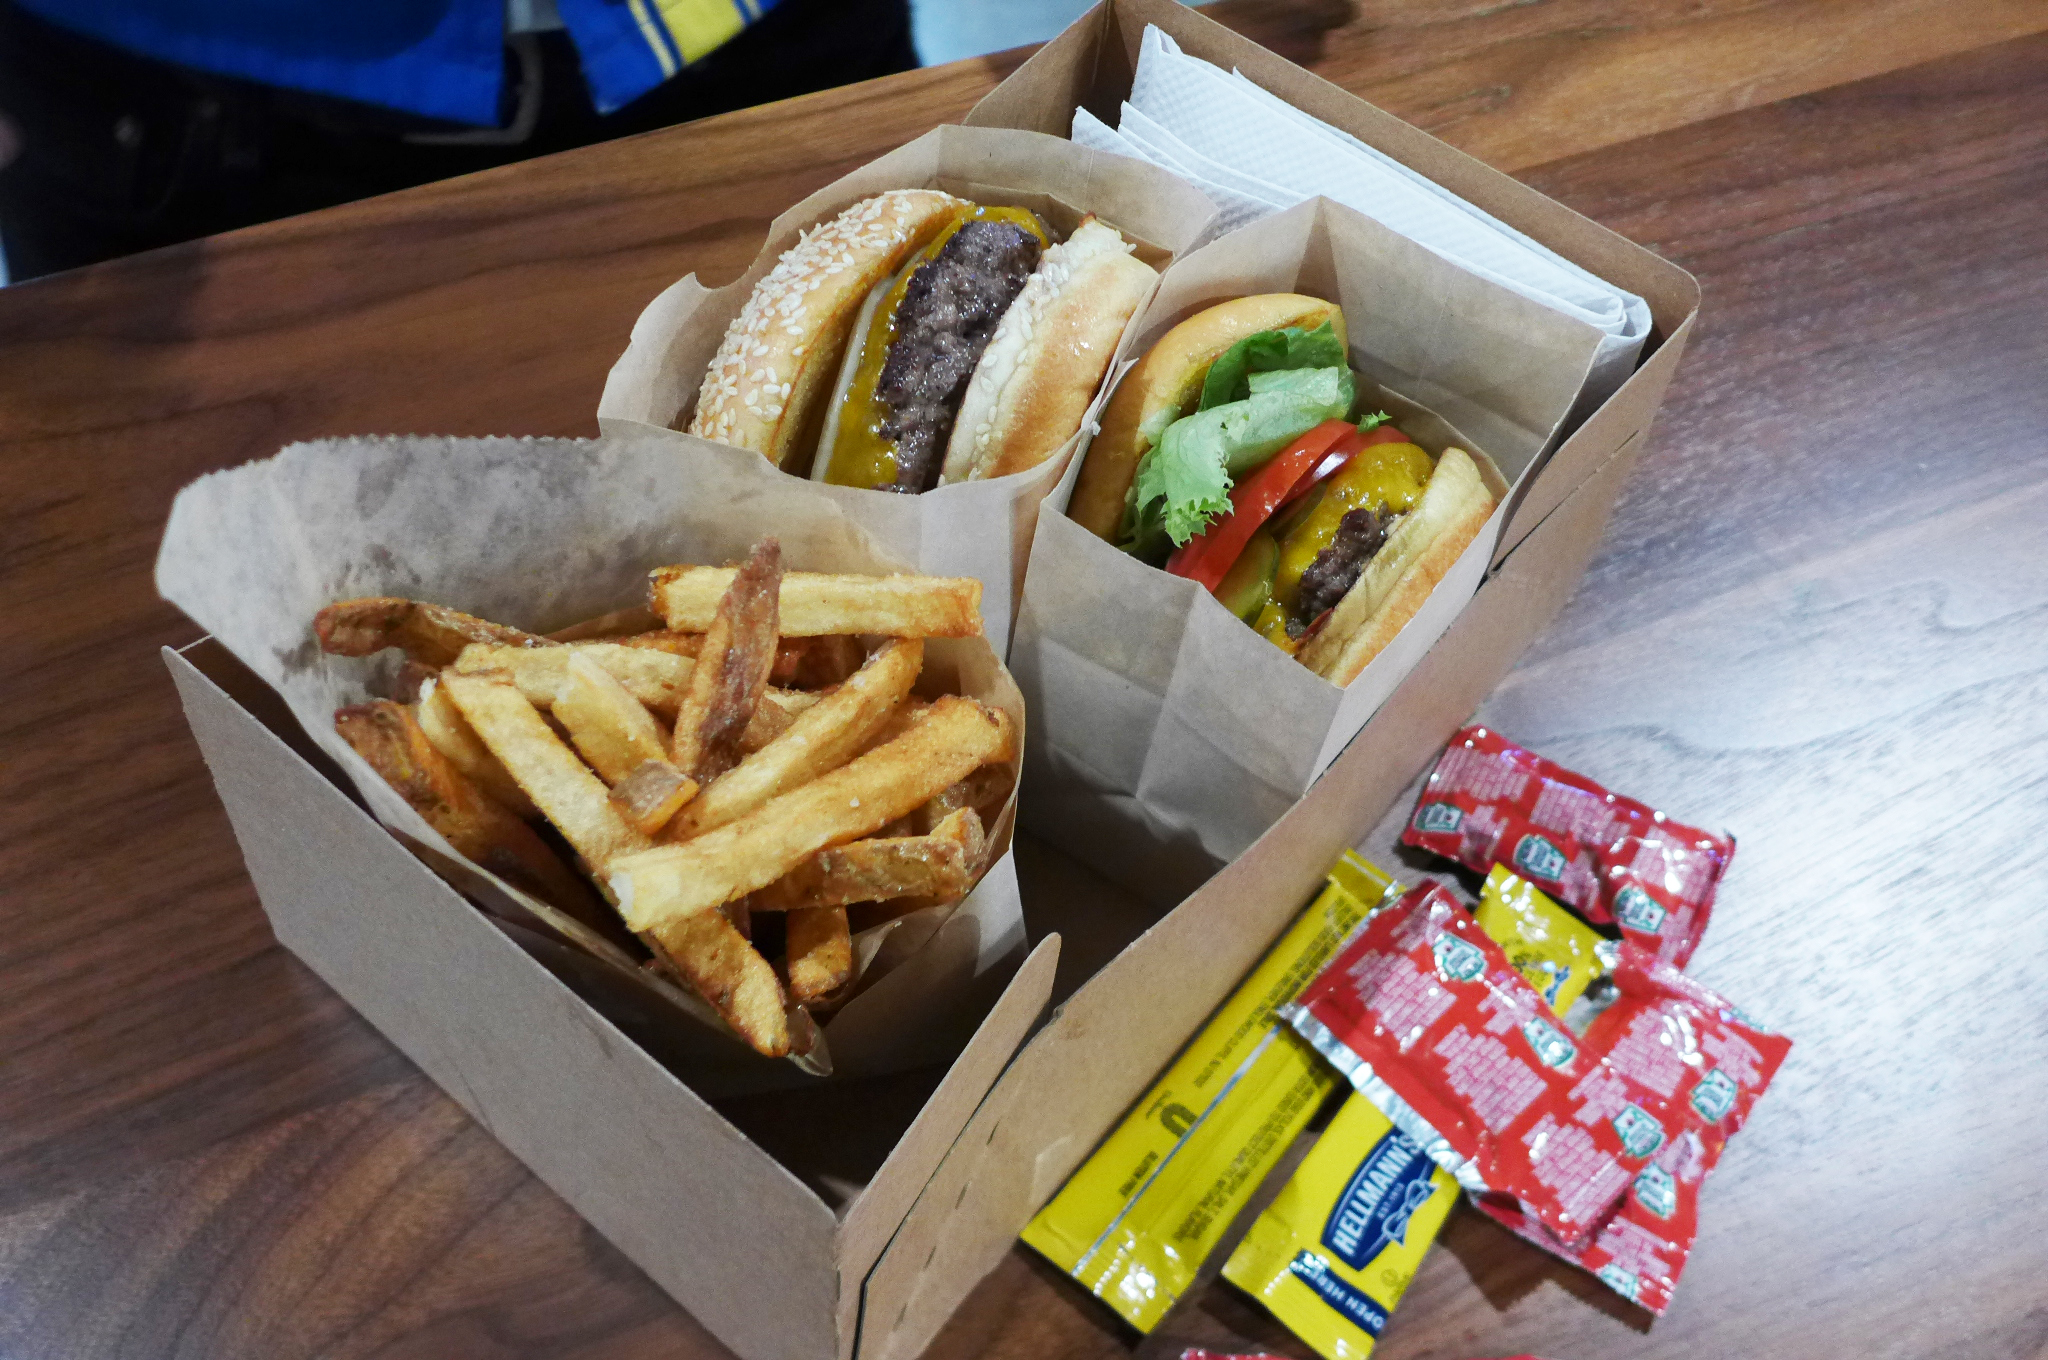 Two burgers in boxes, one with salad stuff on it the other without, on sesame seed buns with french fries on the side.